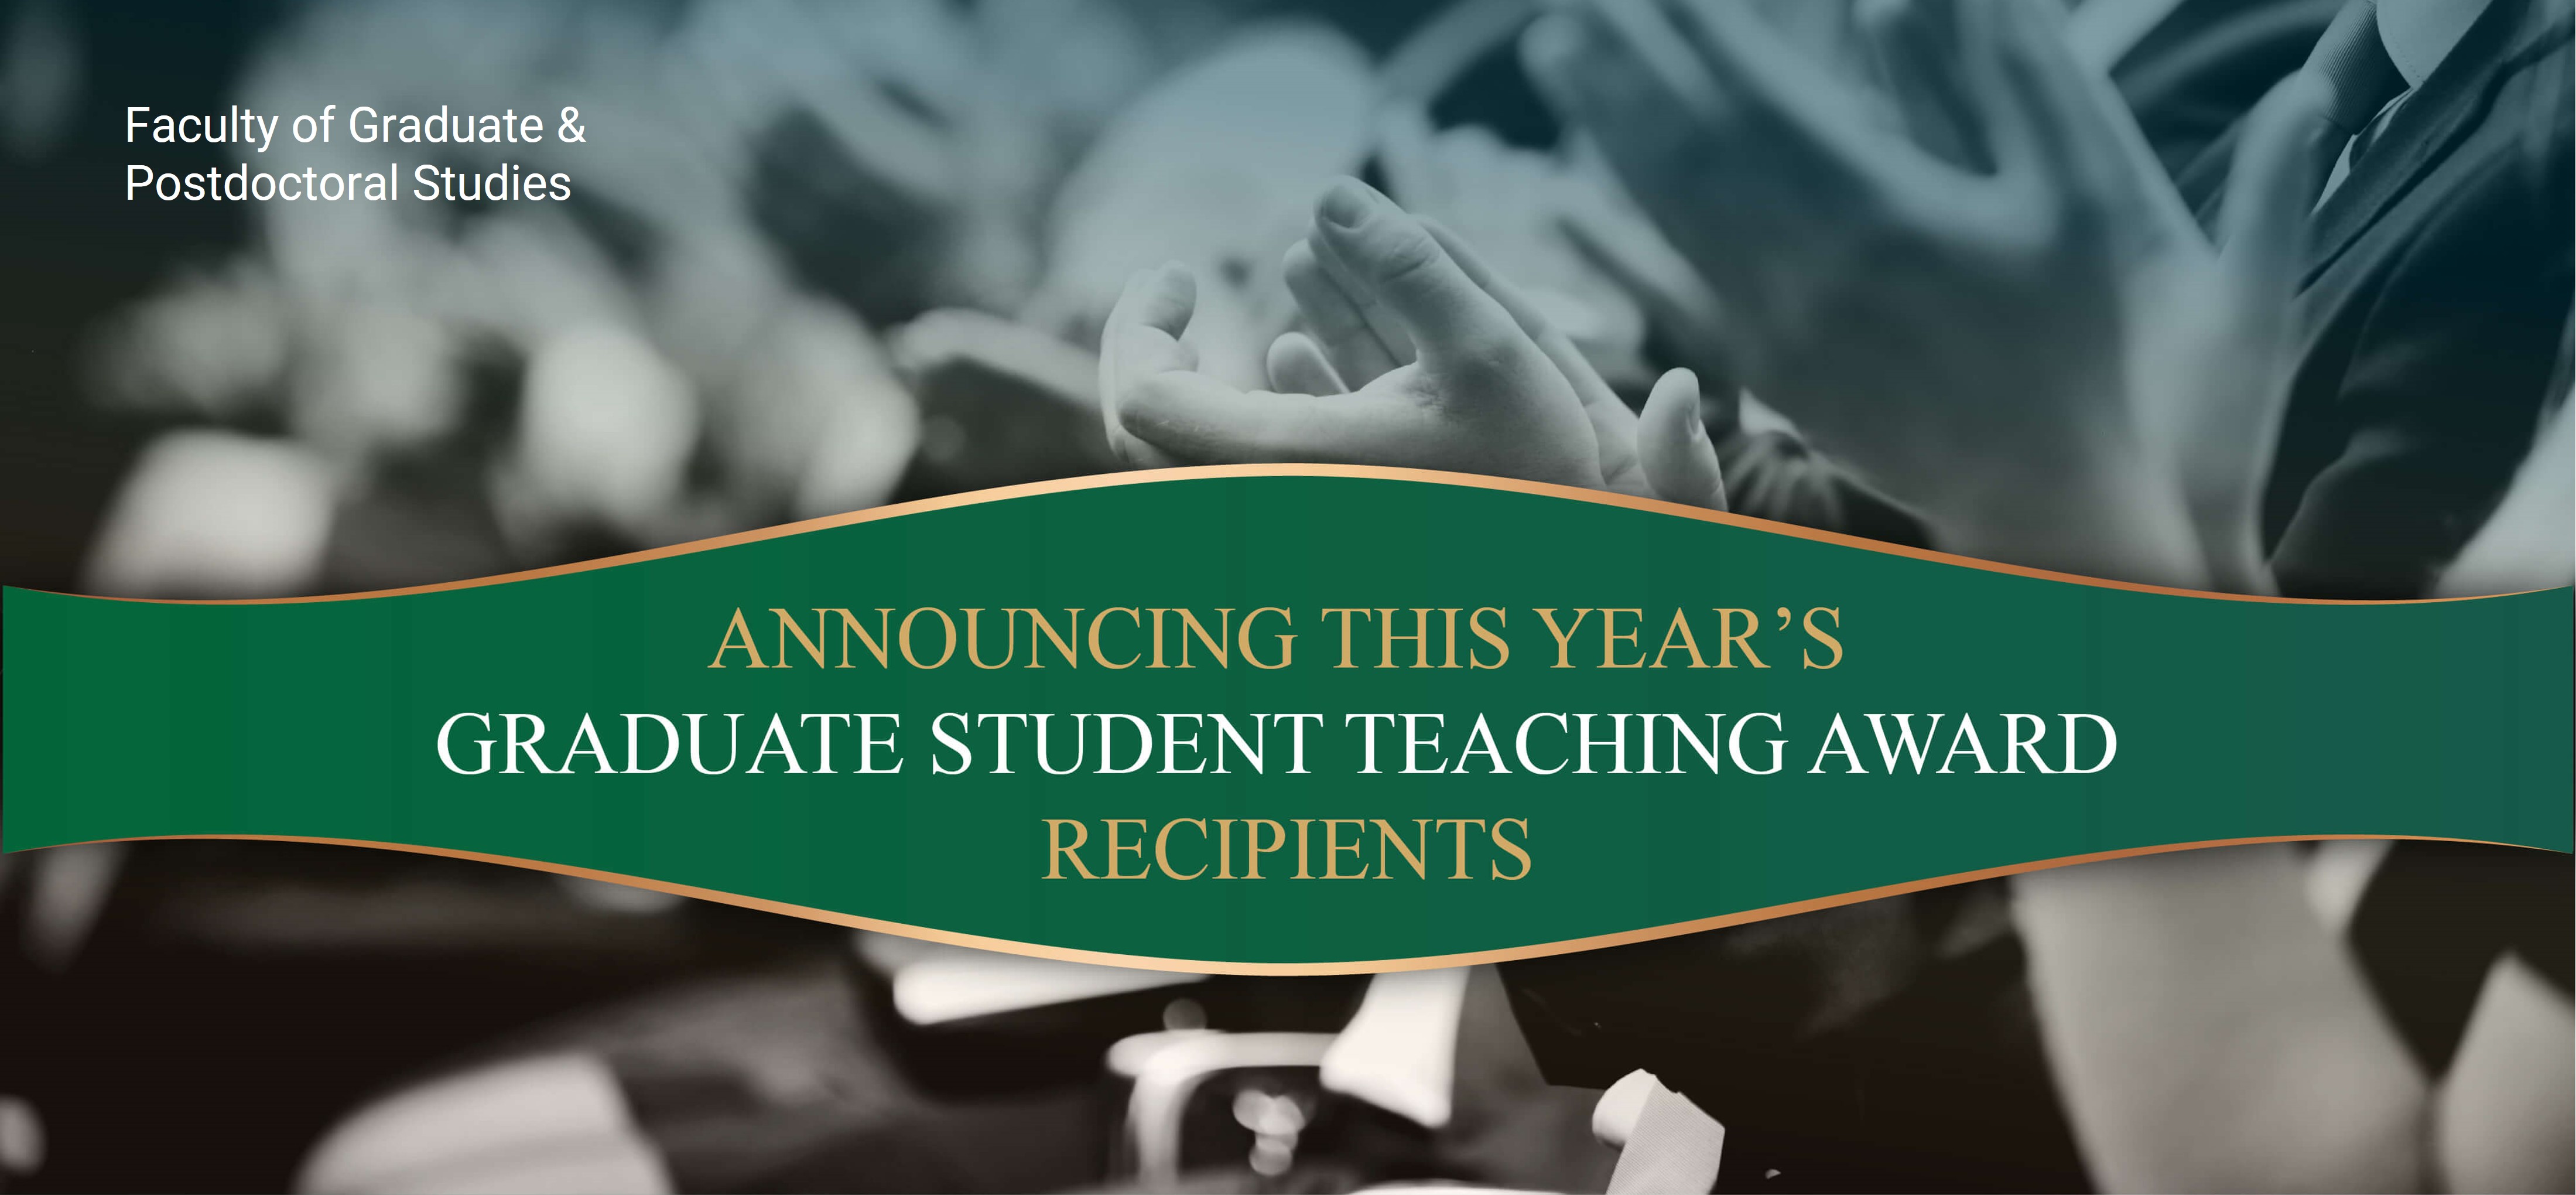 Announcing this Year's Graduate Student Teaching Award Recipients